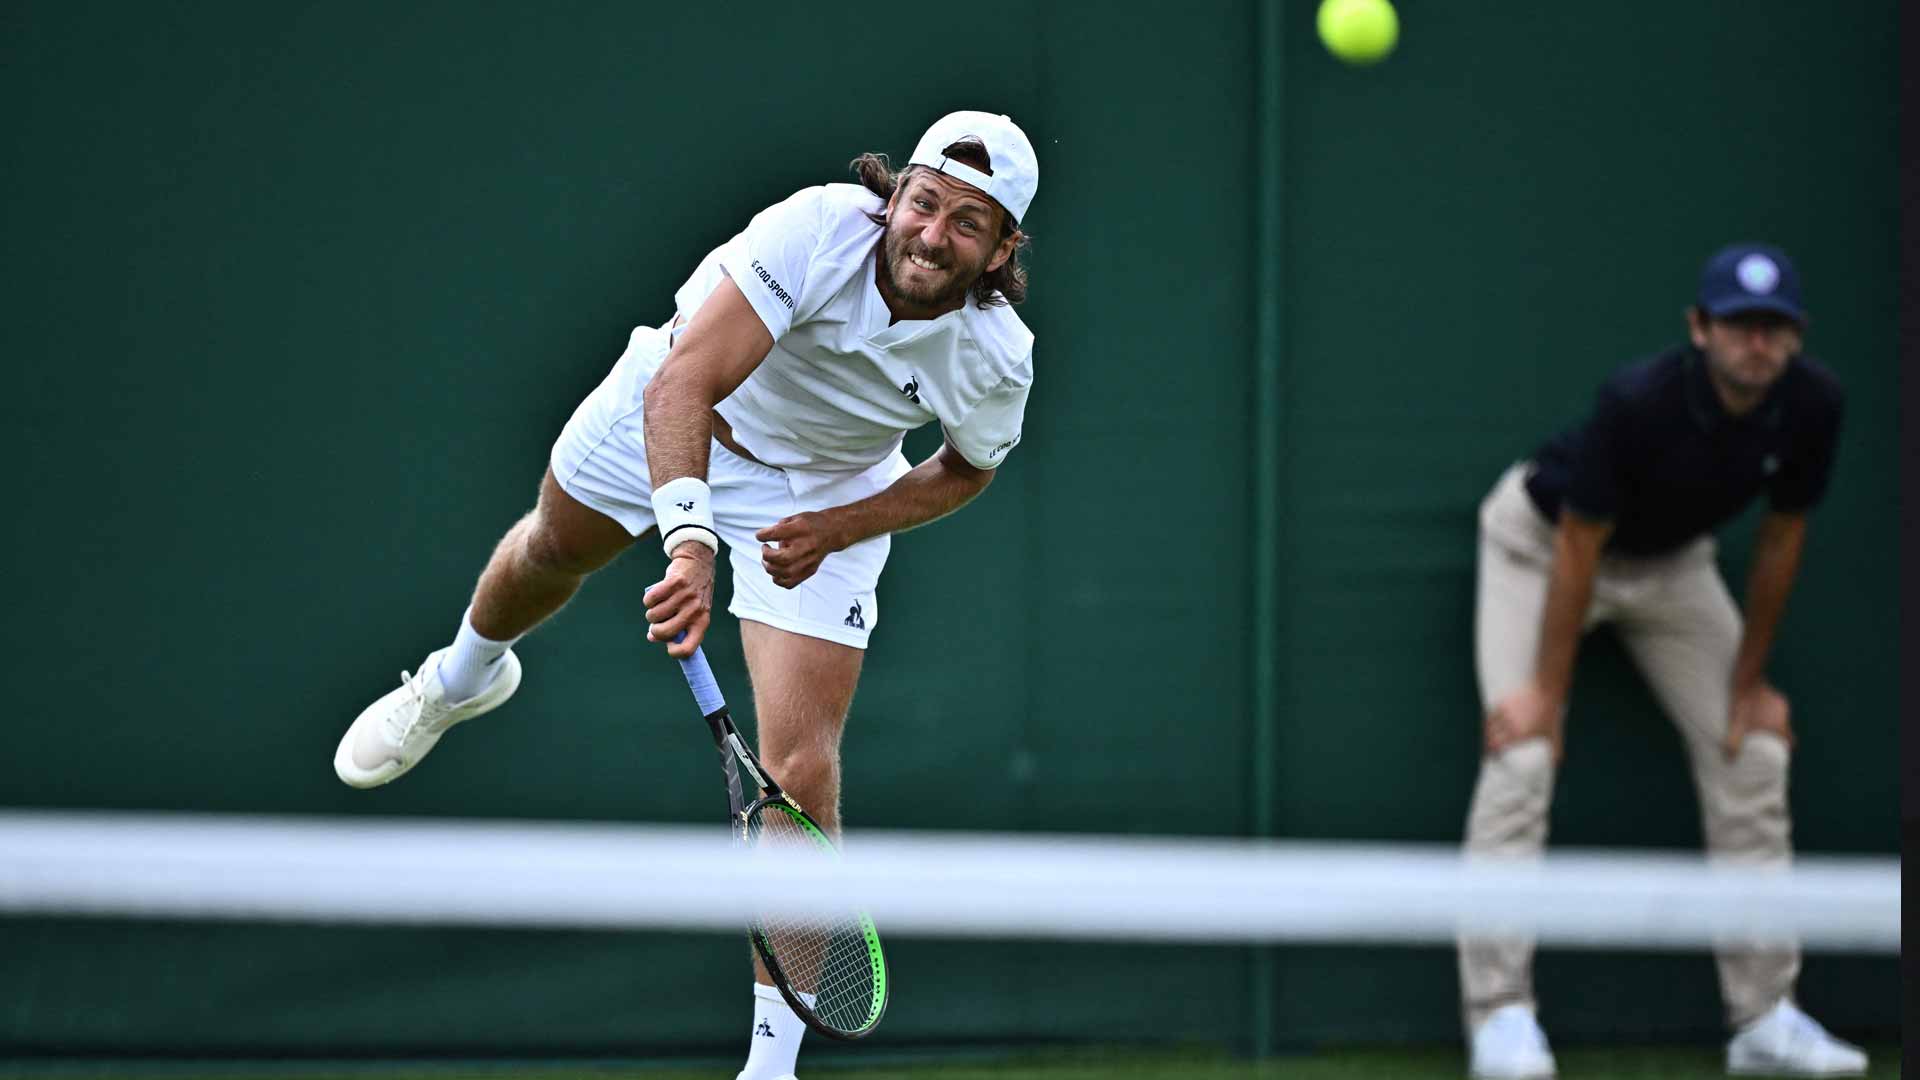 Lucas Pouille wins a three-setter on Monday to reach the second round of Wimbledon qualifying.